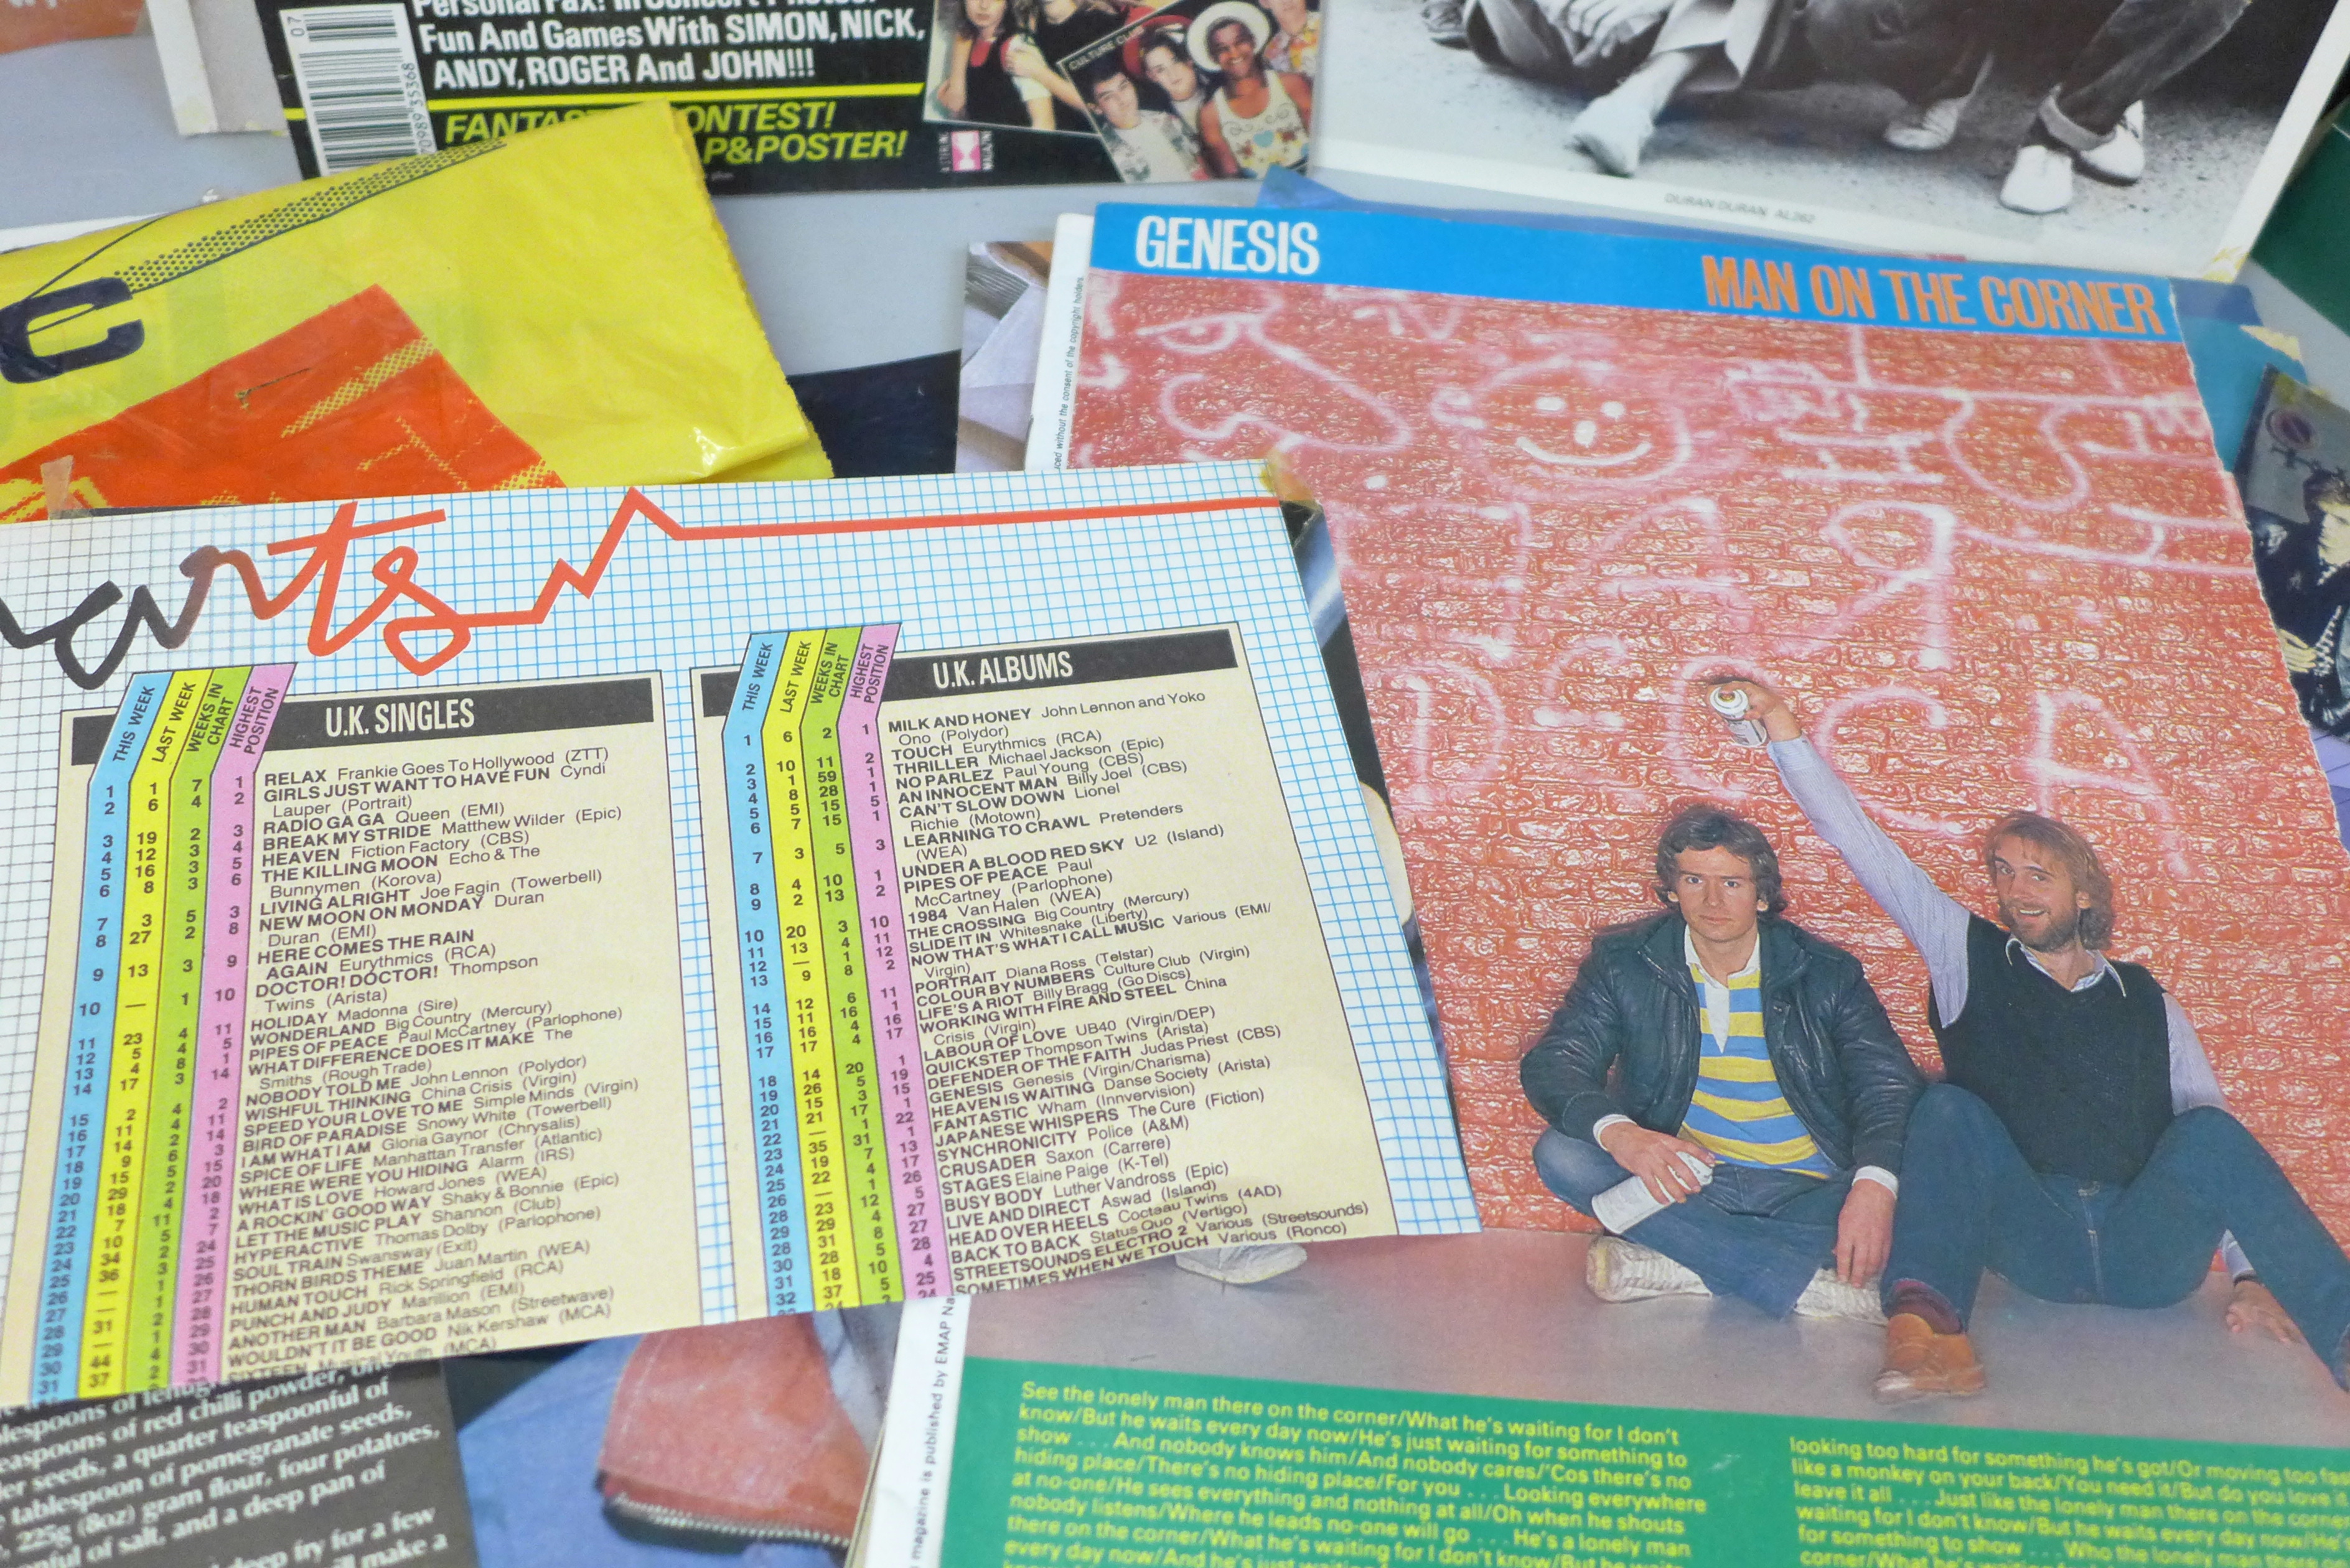 Duran Duran memorabilia including singles, posters, a book and fan club newsletters - Image 2 of 6